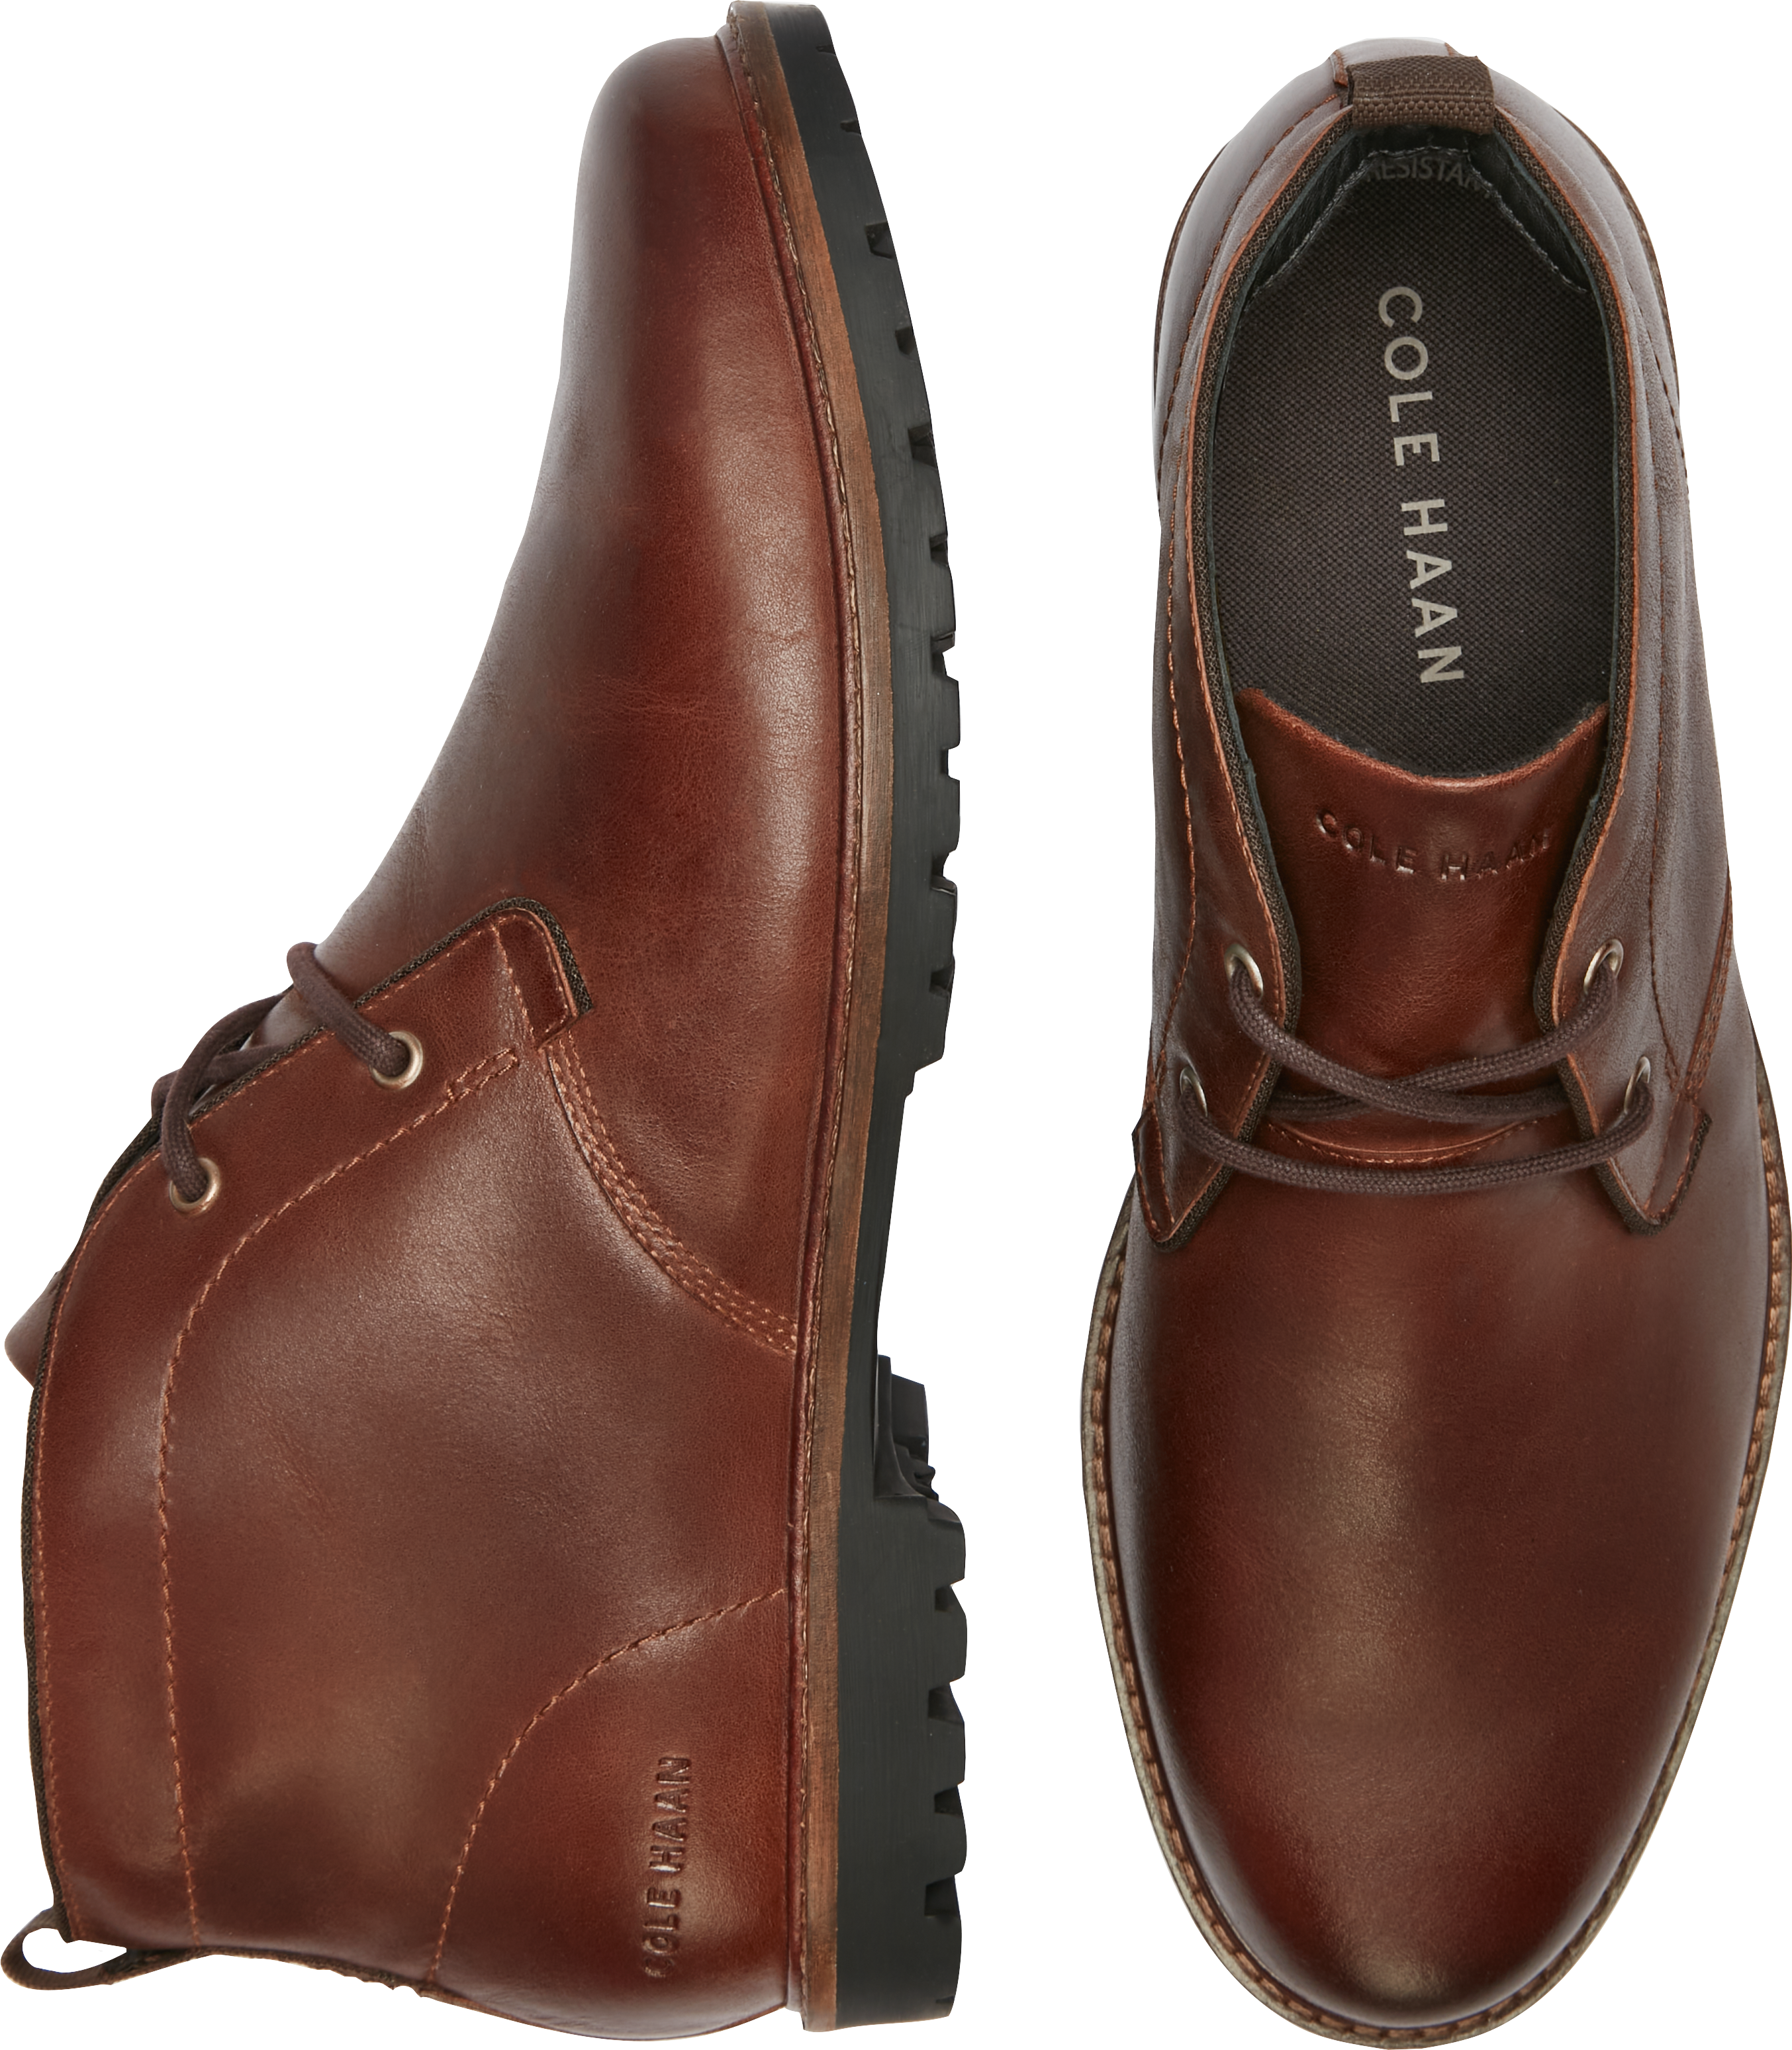 https://image.mooresclothing.ca/is/image/Moores/40G7_02_COLE_HAAN_CASUAL_SHOES_BROWN_MAIN